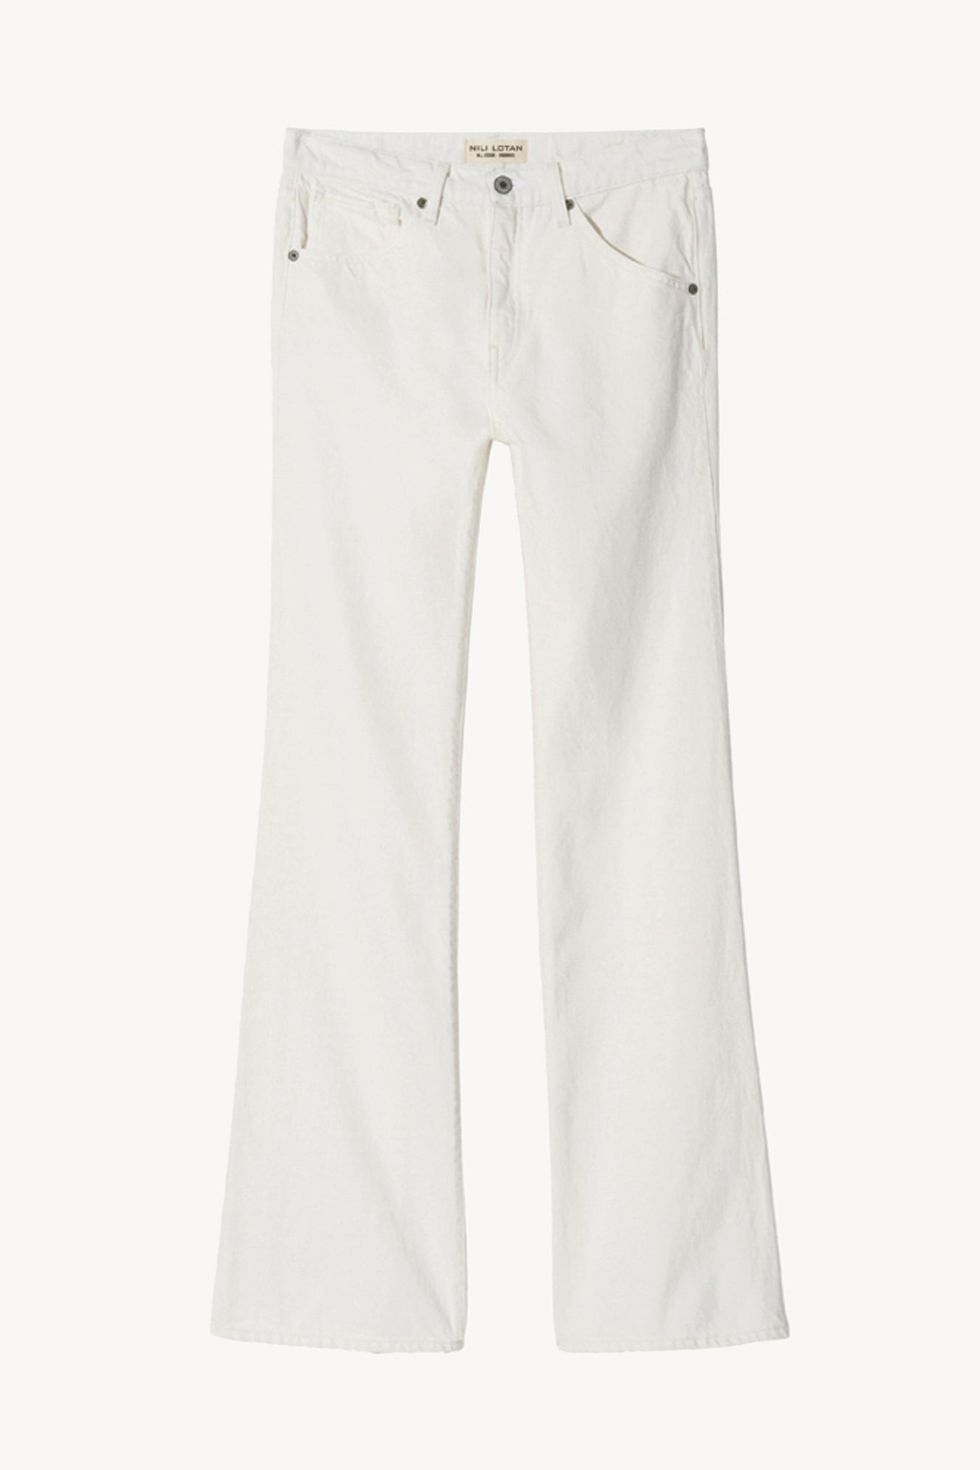 White Bell Bottom Jeans - Your Ticket to Looking Good, Standing